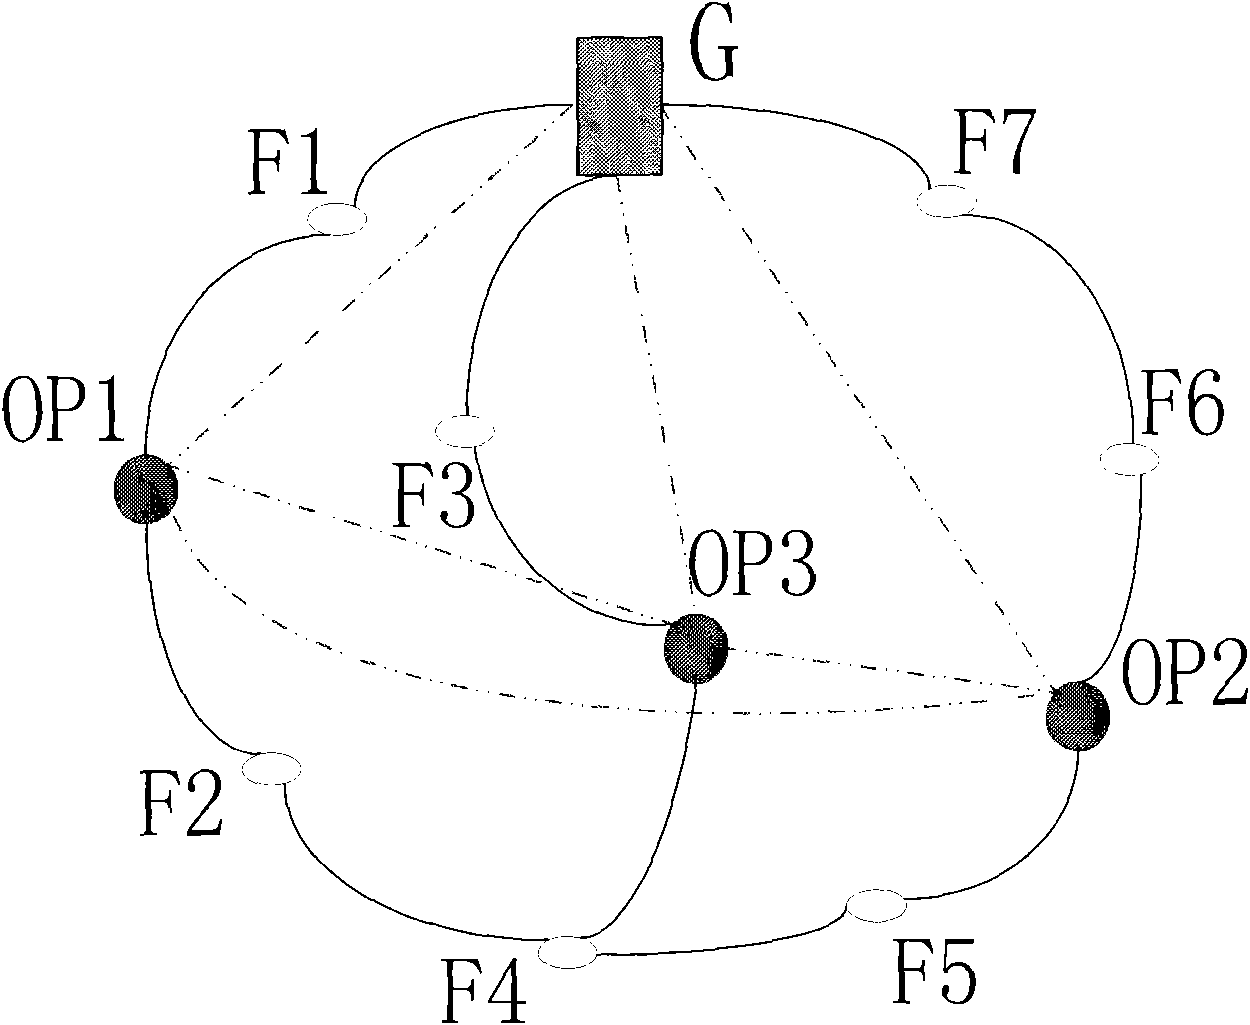 Method for hierarchichal onion rings routing